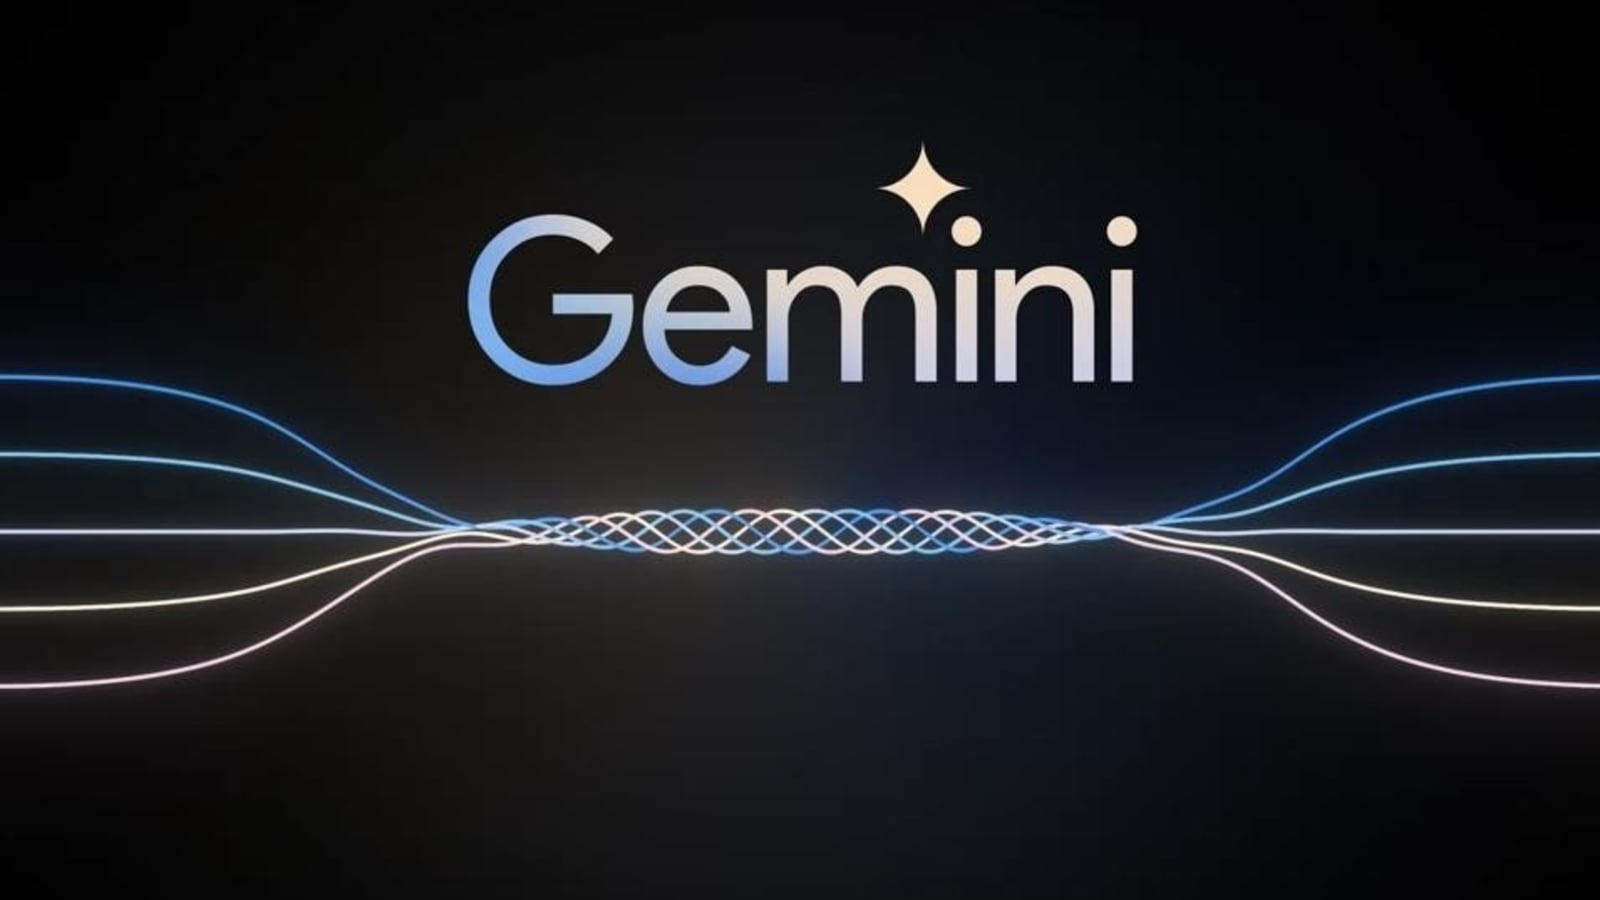 Gemini AI picture device to relaunch in a few weeks: Google DeepMind CEO Demis Hassabis